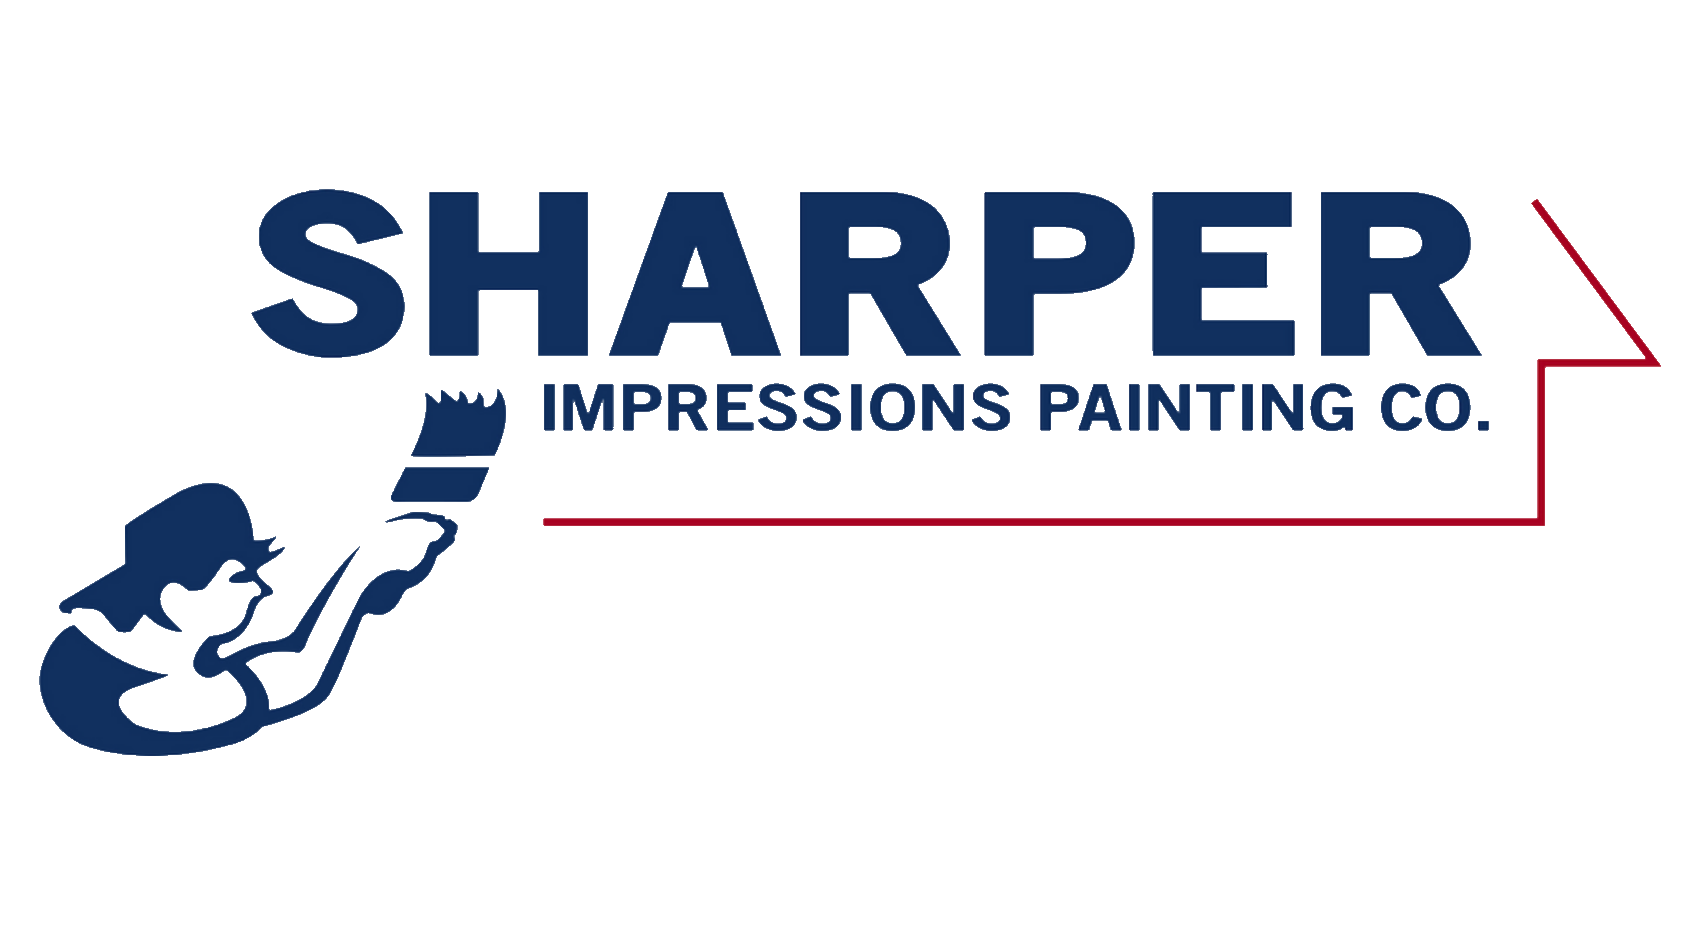 hometown veteran heads new residential painting company location in orlando florida